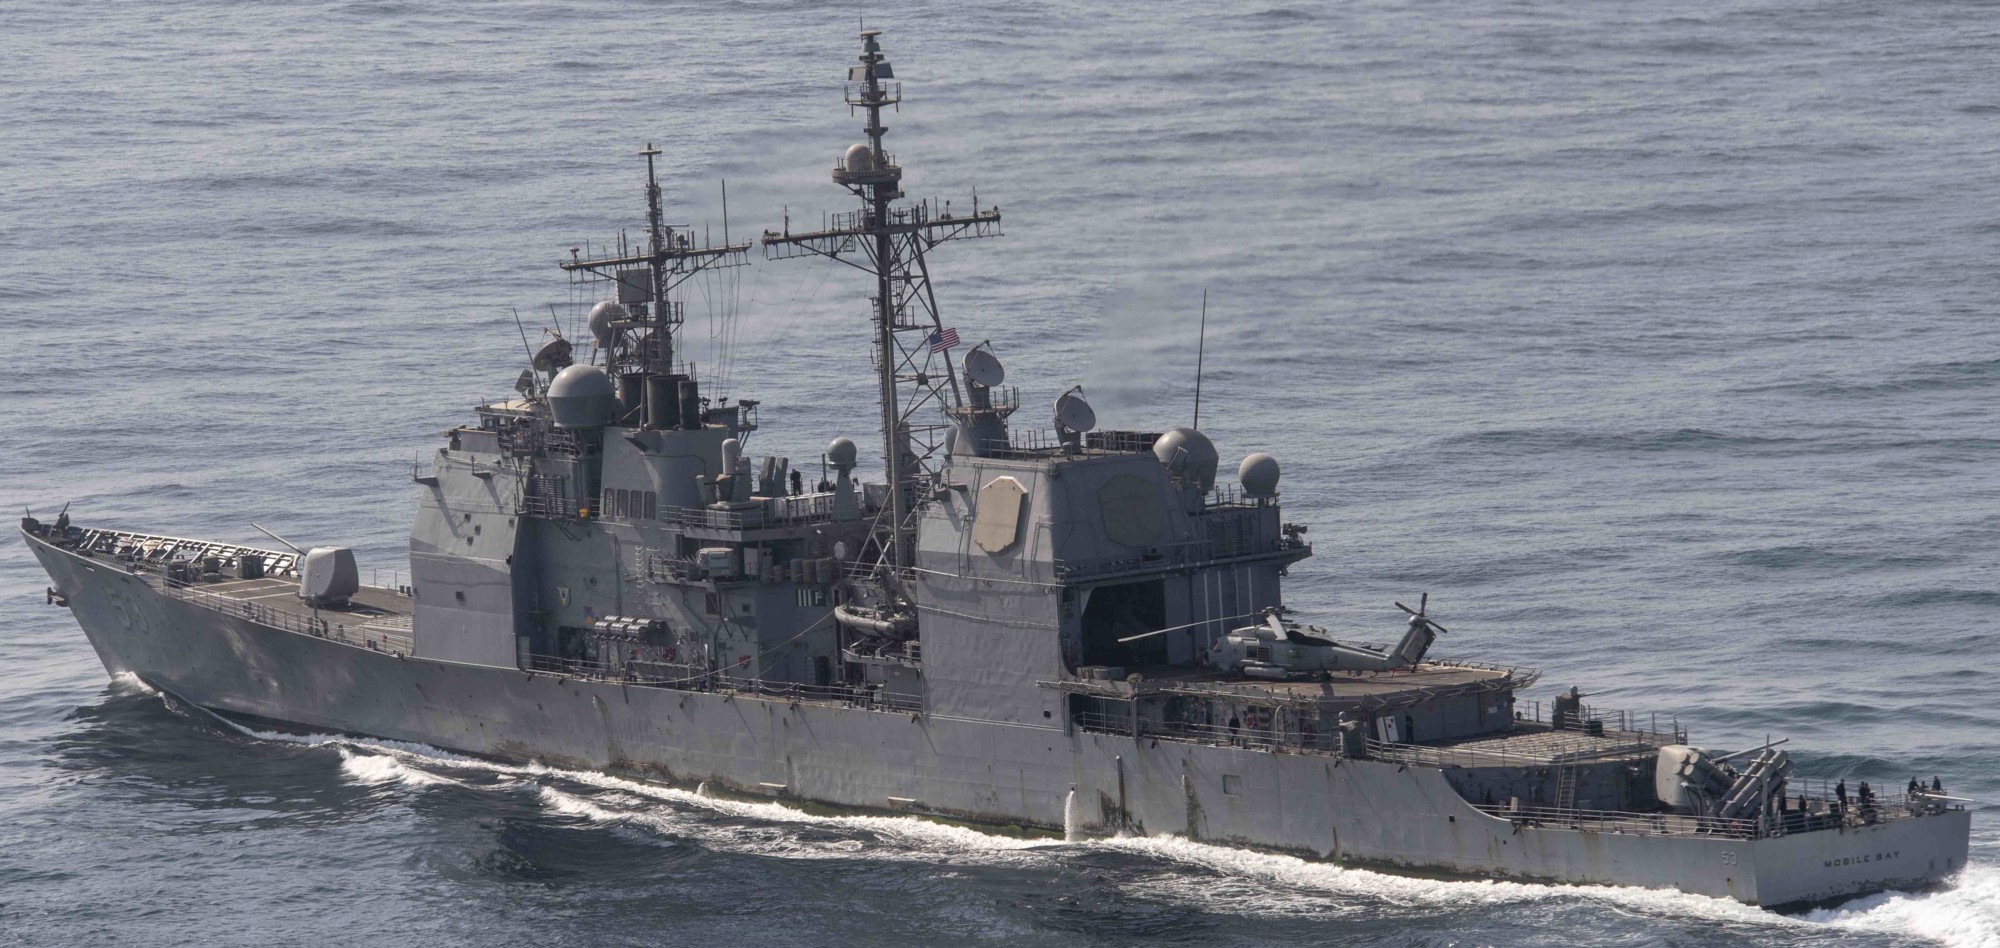 cg-53 uss mobile bay ticonderoga class guided missile cruiser aegis us navy strait of gibraltar 128